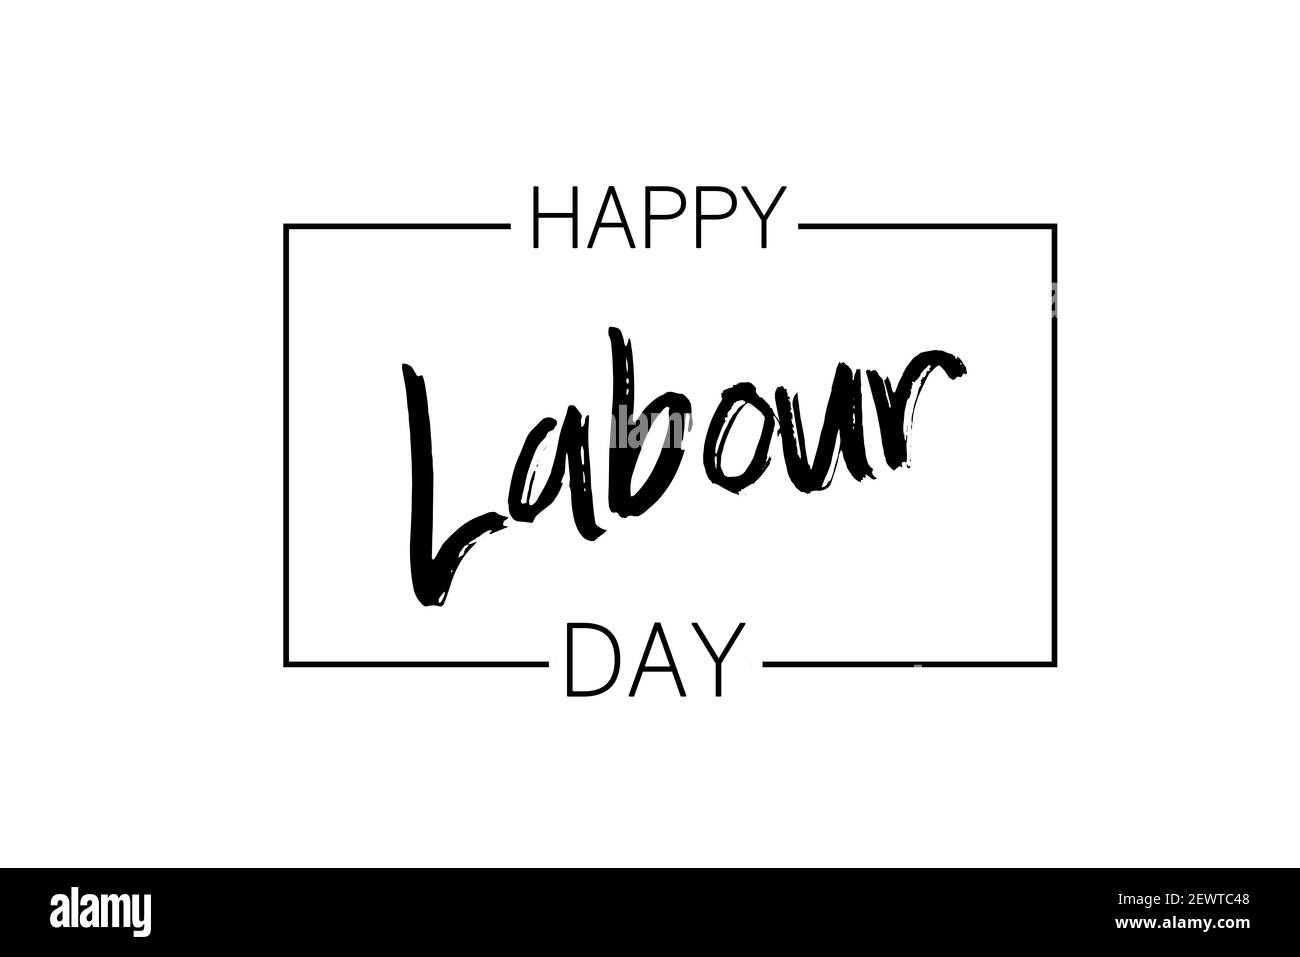 Happy Labour Day calligraphy hand lettering on white background Stock Photo  - Alamy